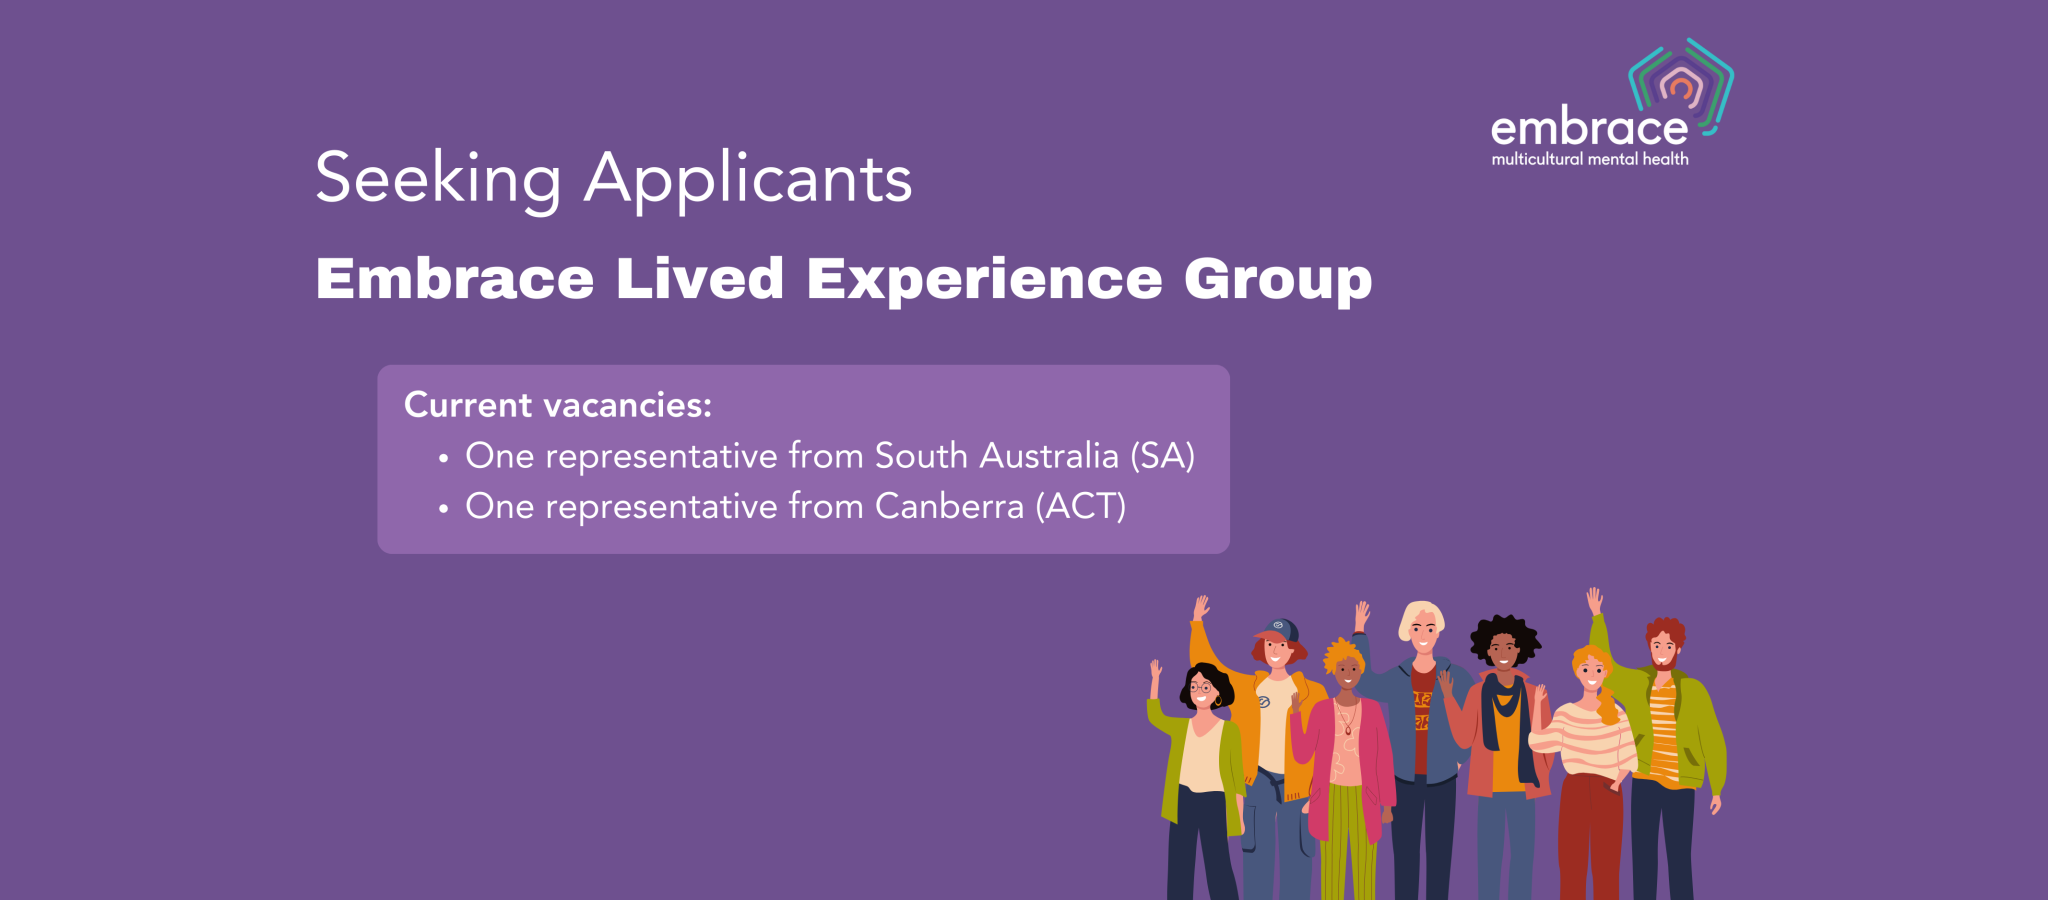 Seeking Applicants: Embrace Lived Experience Group